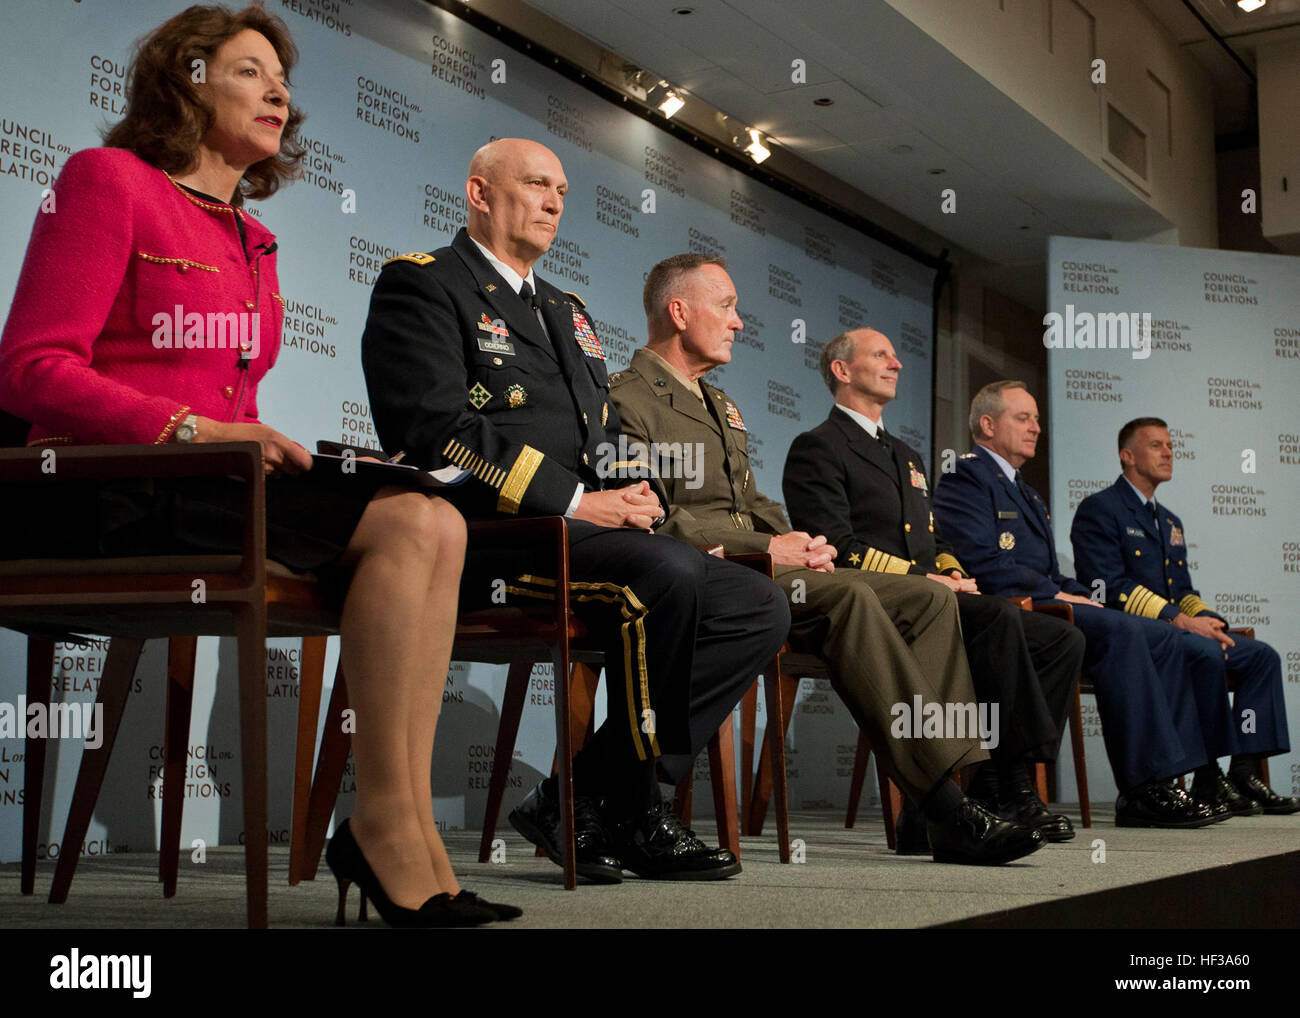 From left to right. Council on Foreign Relations counsel member, Mary M. Boies; Chief of Staff of the Army, Gen. Raymond T. Odierno; Commandant of the Marine Corps, Gen. Joseph F. Dunford, Jr.; Chief of Naval Operations, Adm. Jonathan W. Greenert; Chief of Staff of the Air Force, Gen. Mark A. Welsh III, and Commandant of the Coast Guard, Adm. Paul F. Zukunft attend the Robert B. McKeon Endowed Series on Military Strategy and Leadership panel at the Council on Foreign Relations, New York, N.Y., May 12, 2015. The Robert B. McKeon Series on Military Strategy and Leadership featured prominent indi Stock Photo